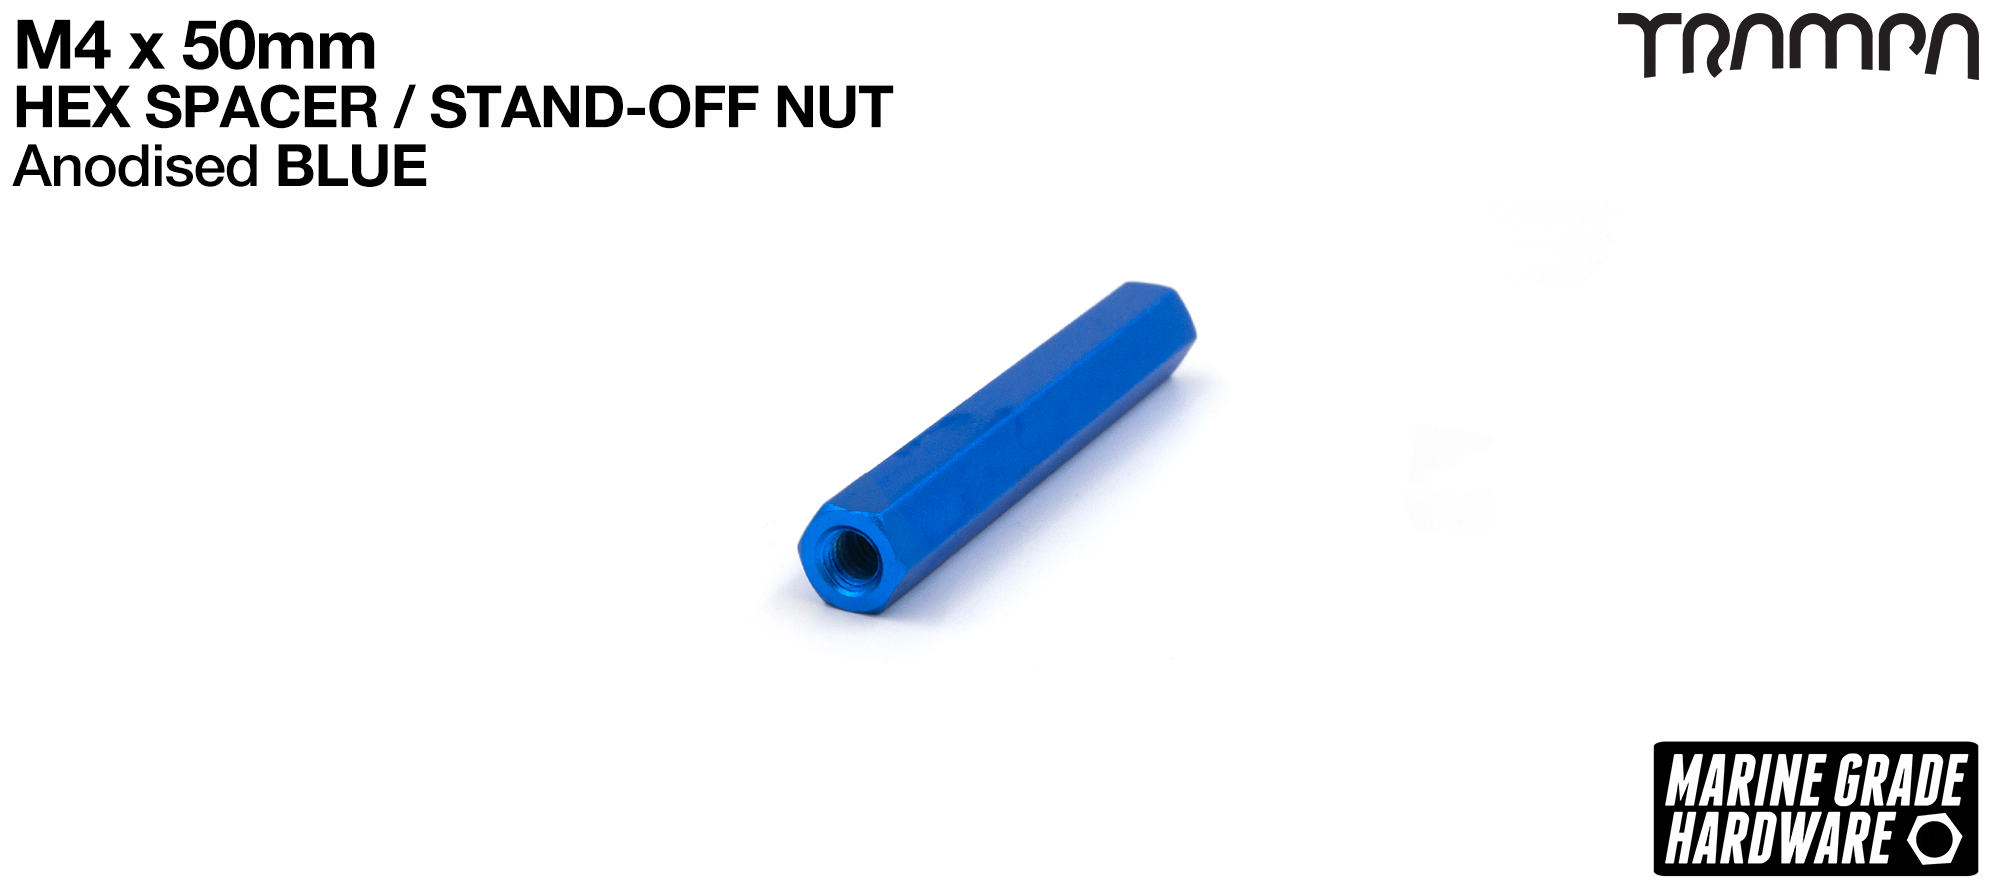 M4 x 50mm Aluminium Threaded HEX Spacer Nut used for assembling the MONSTER Battery Boxes - BLUE